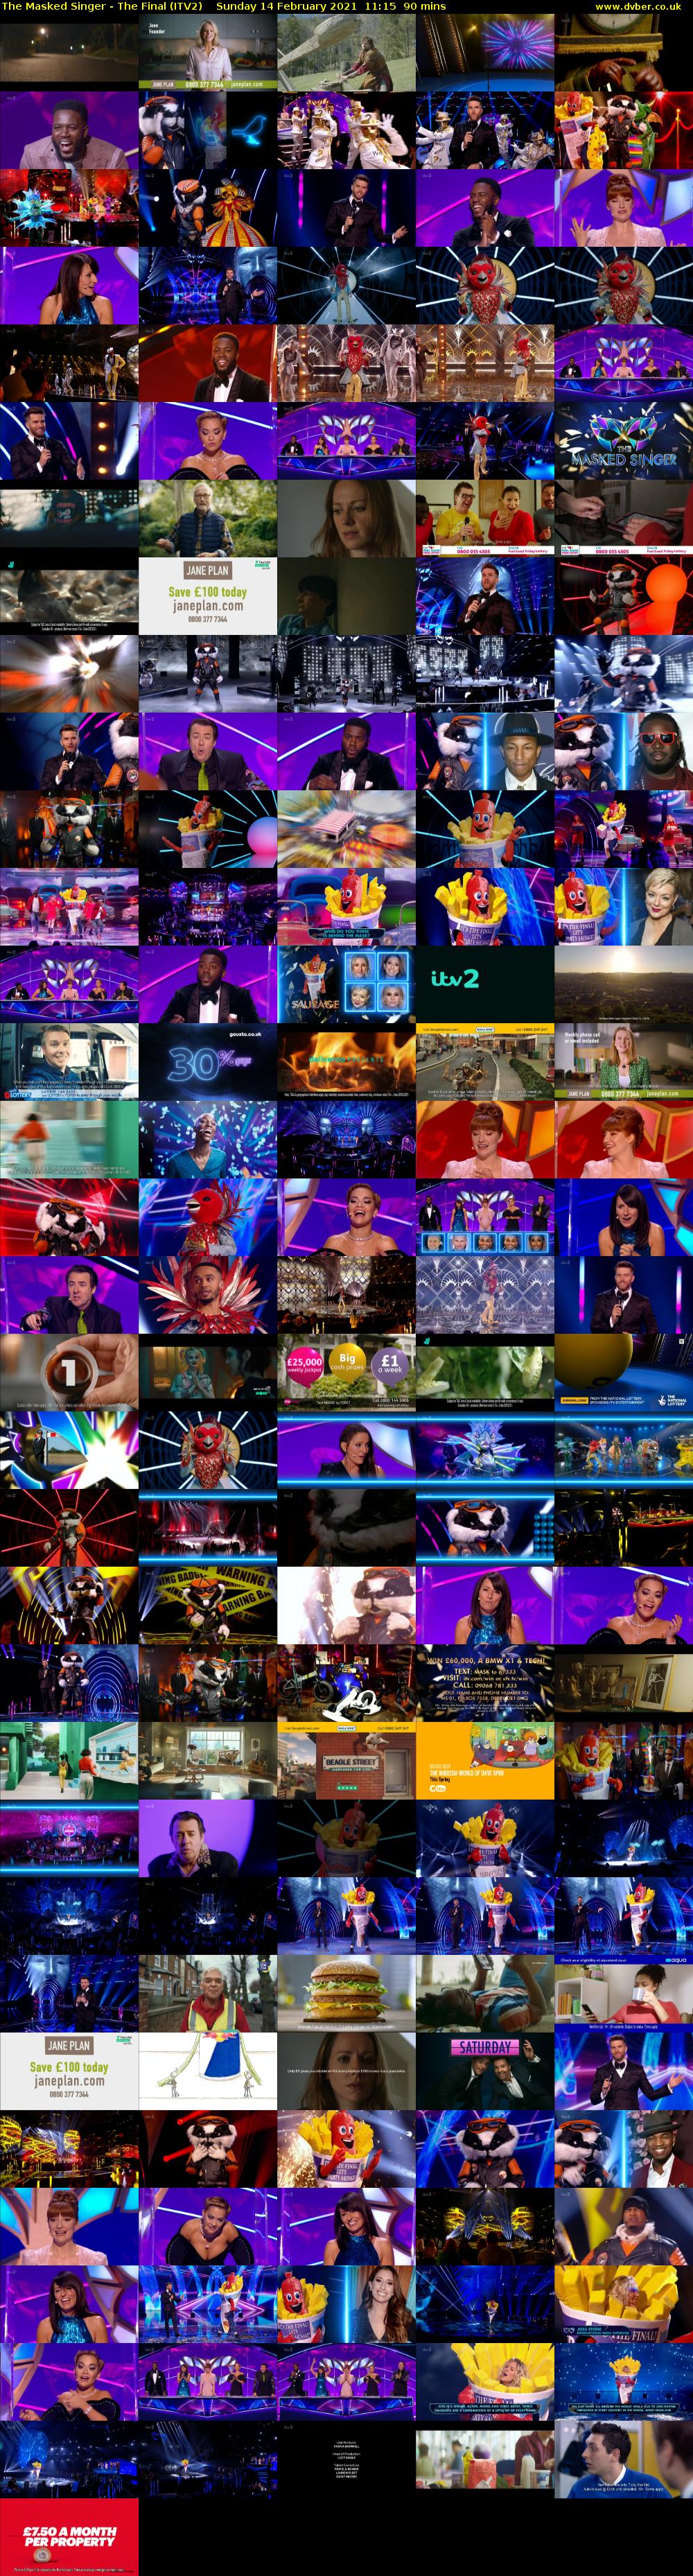 The Masked Singer - The Final (ITV2) Sunday 14 February 2021 11:15 - 12:45